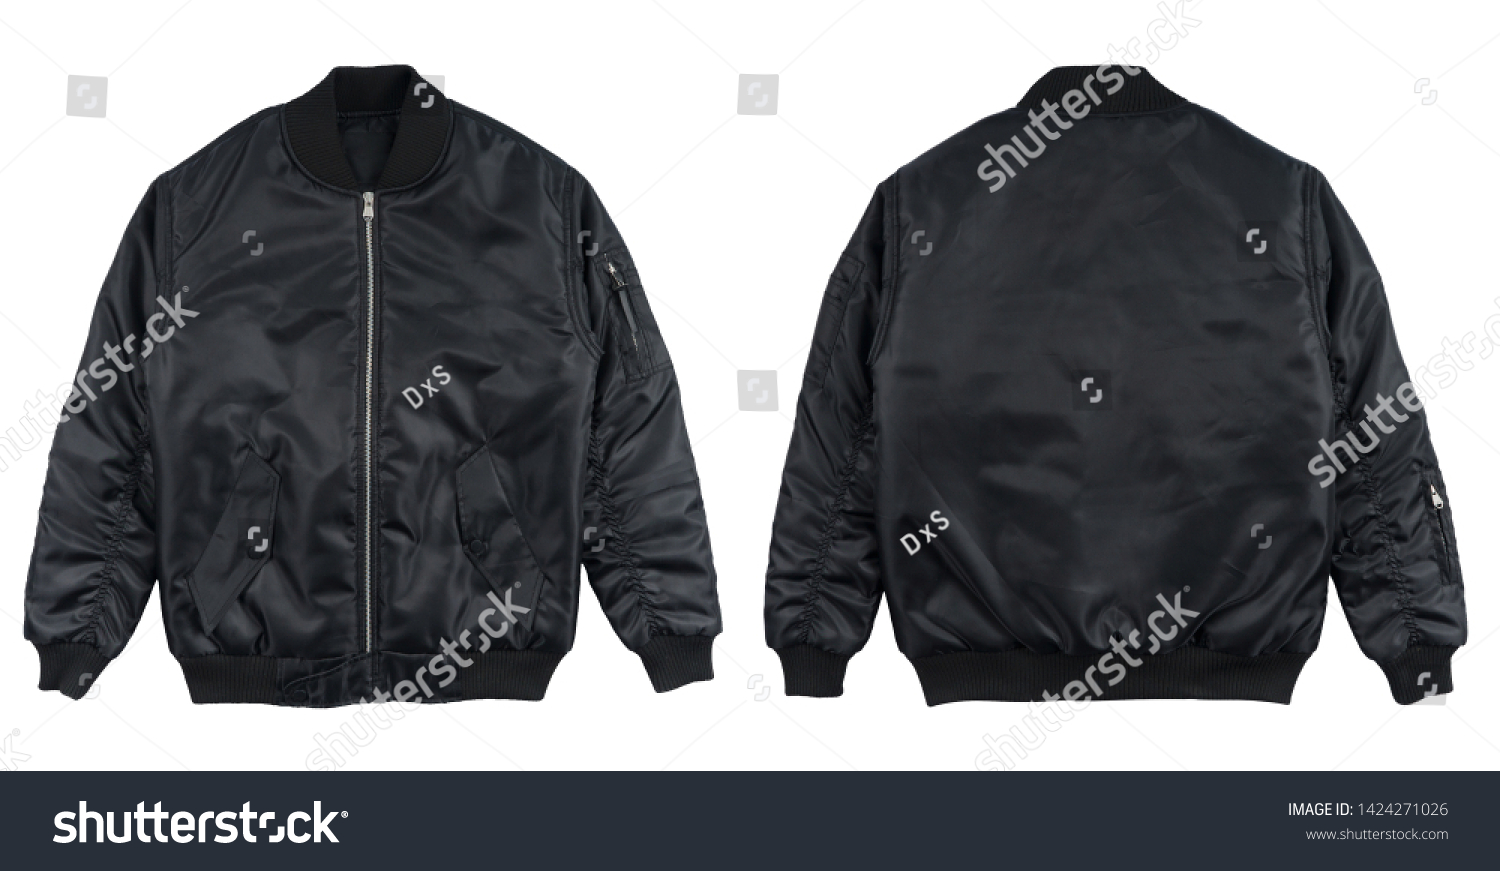 Bomber jacket black color in front and back view isolated on white background. #1424271026